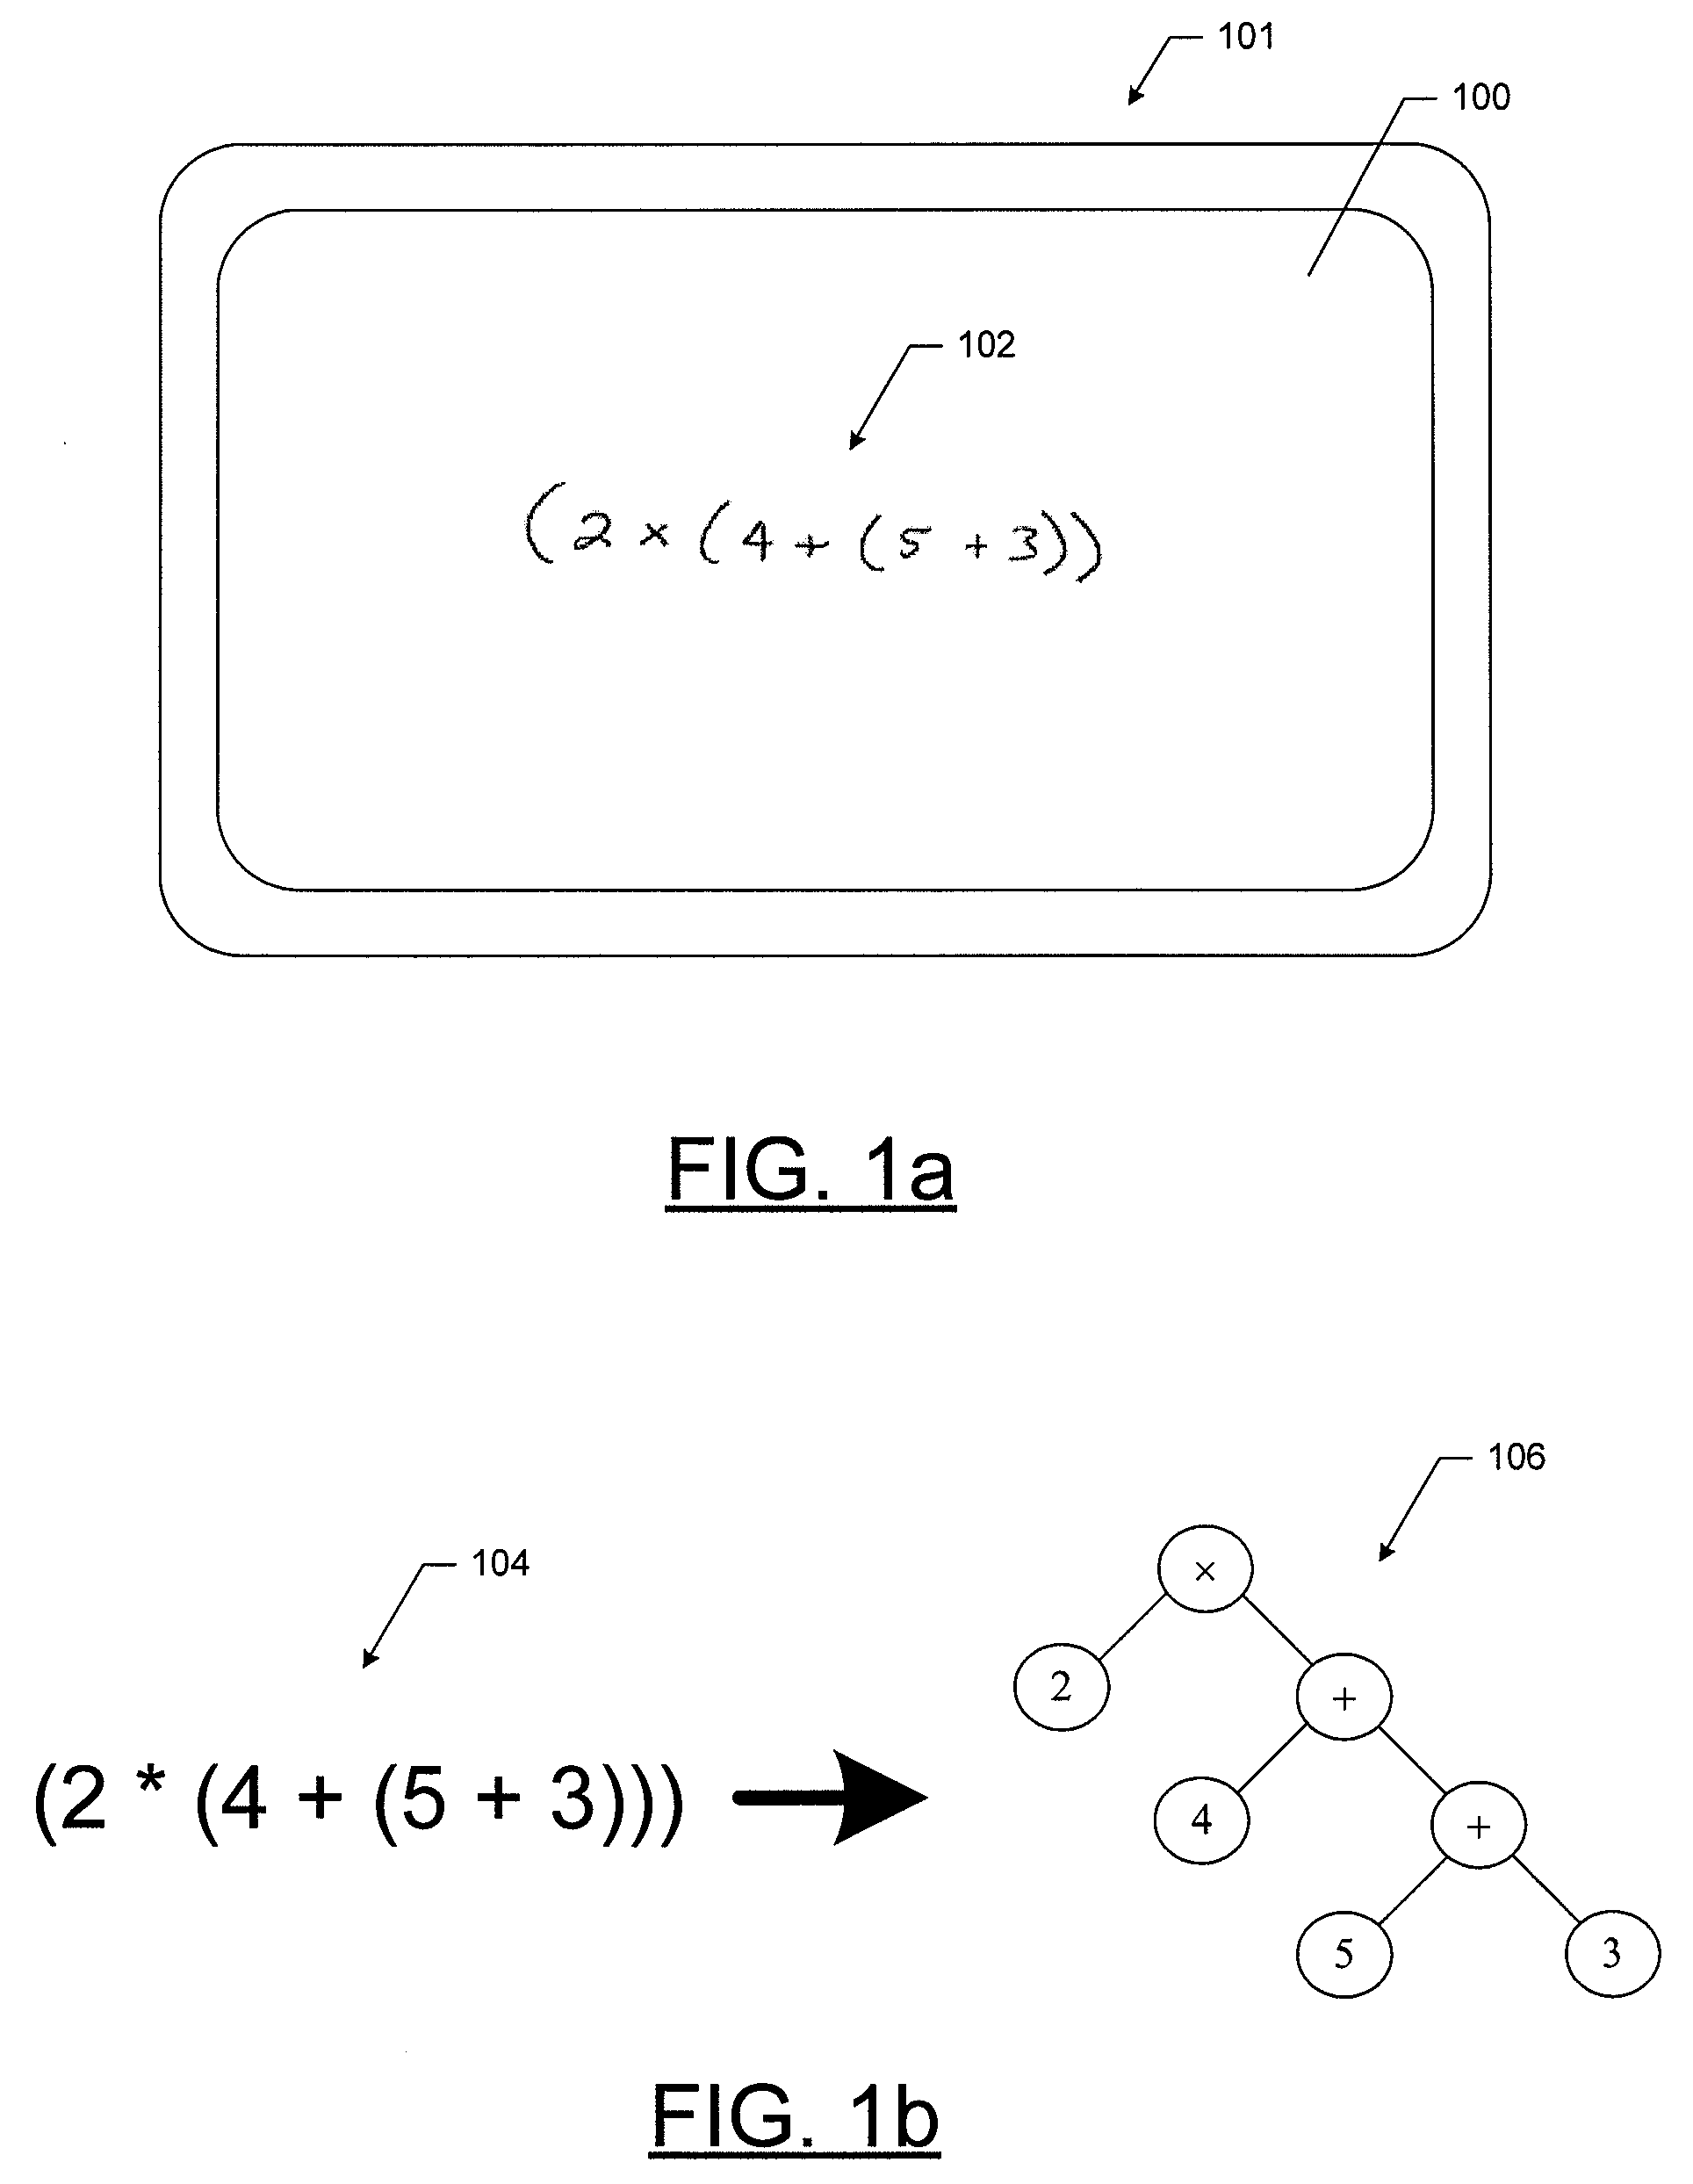 Method, Apparatus, and Computer Program Product for Written Mathematical Expression Analysis